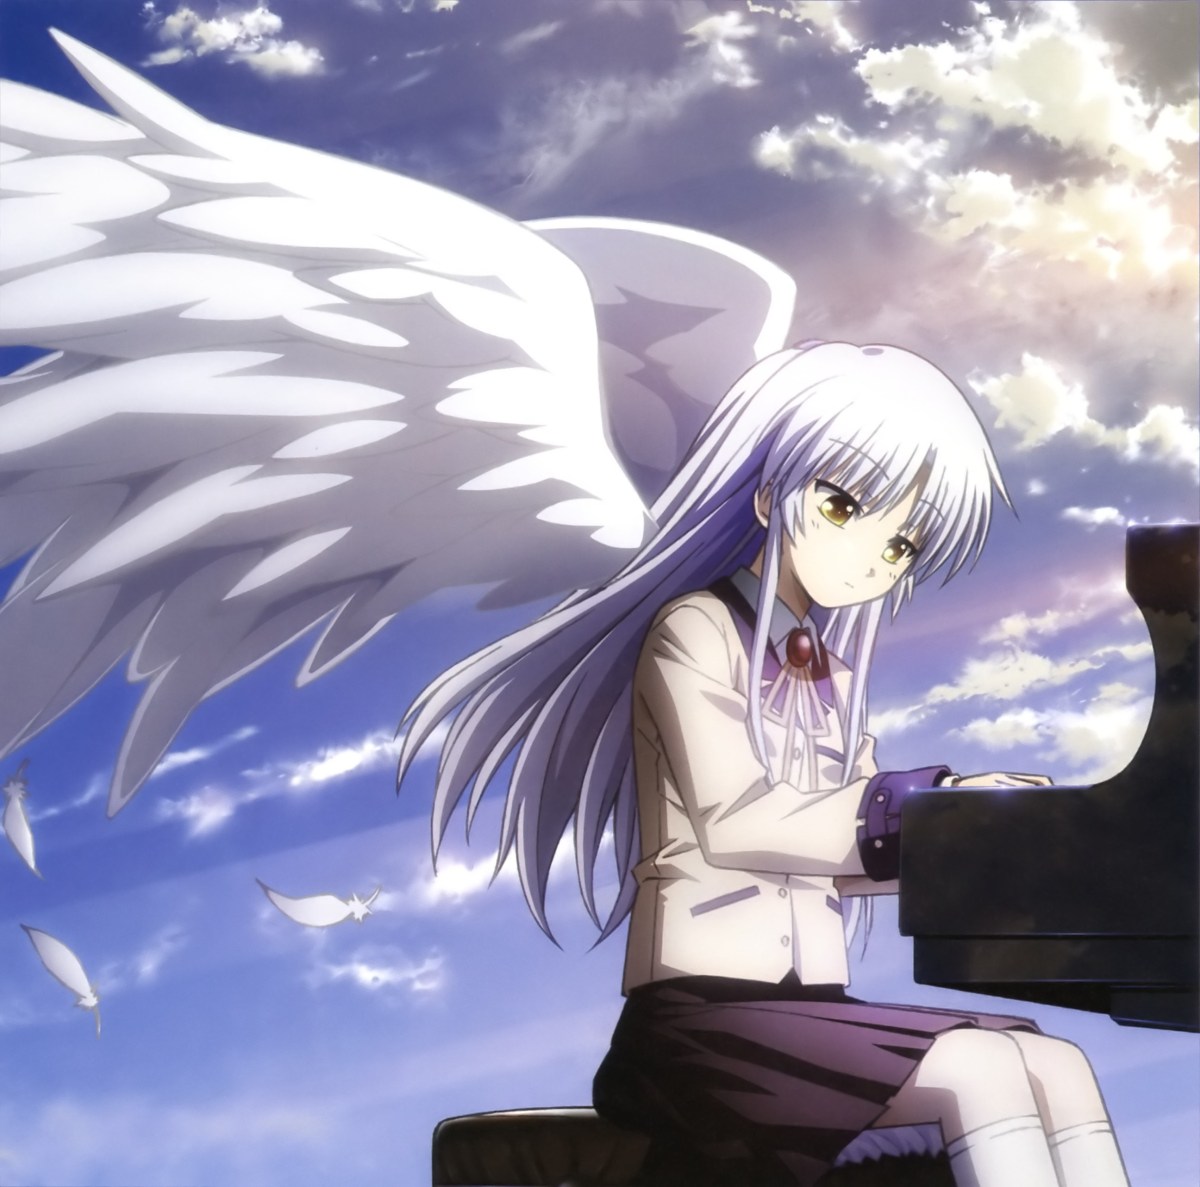 Kanade from angel beats playing piano (P.A. Works)